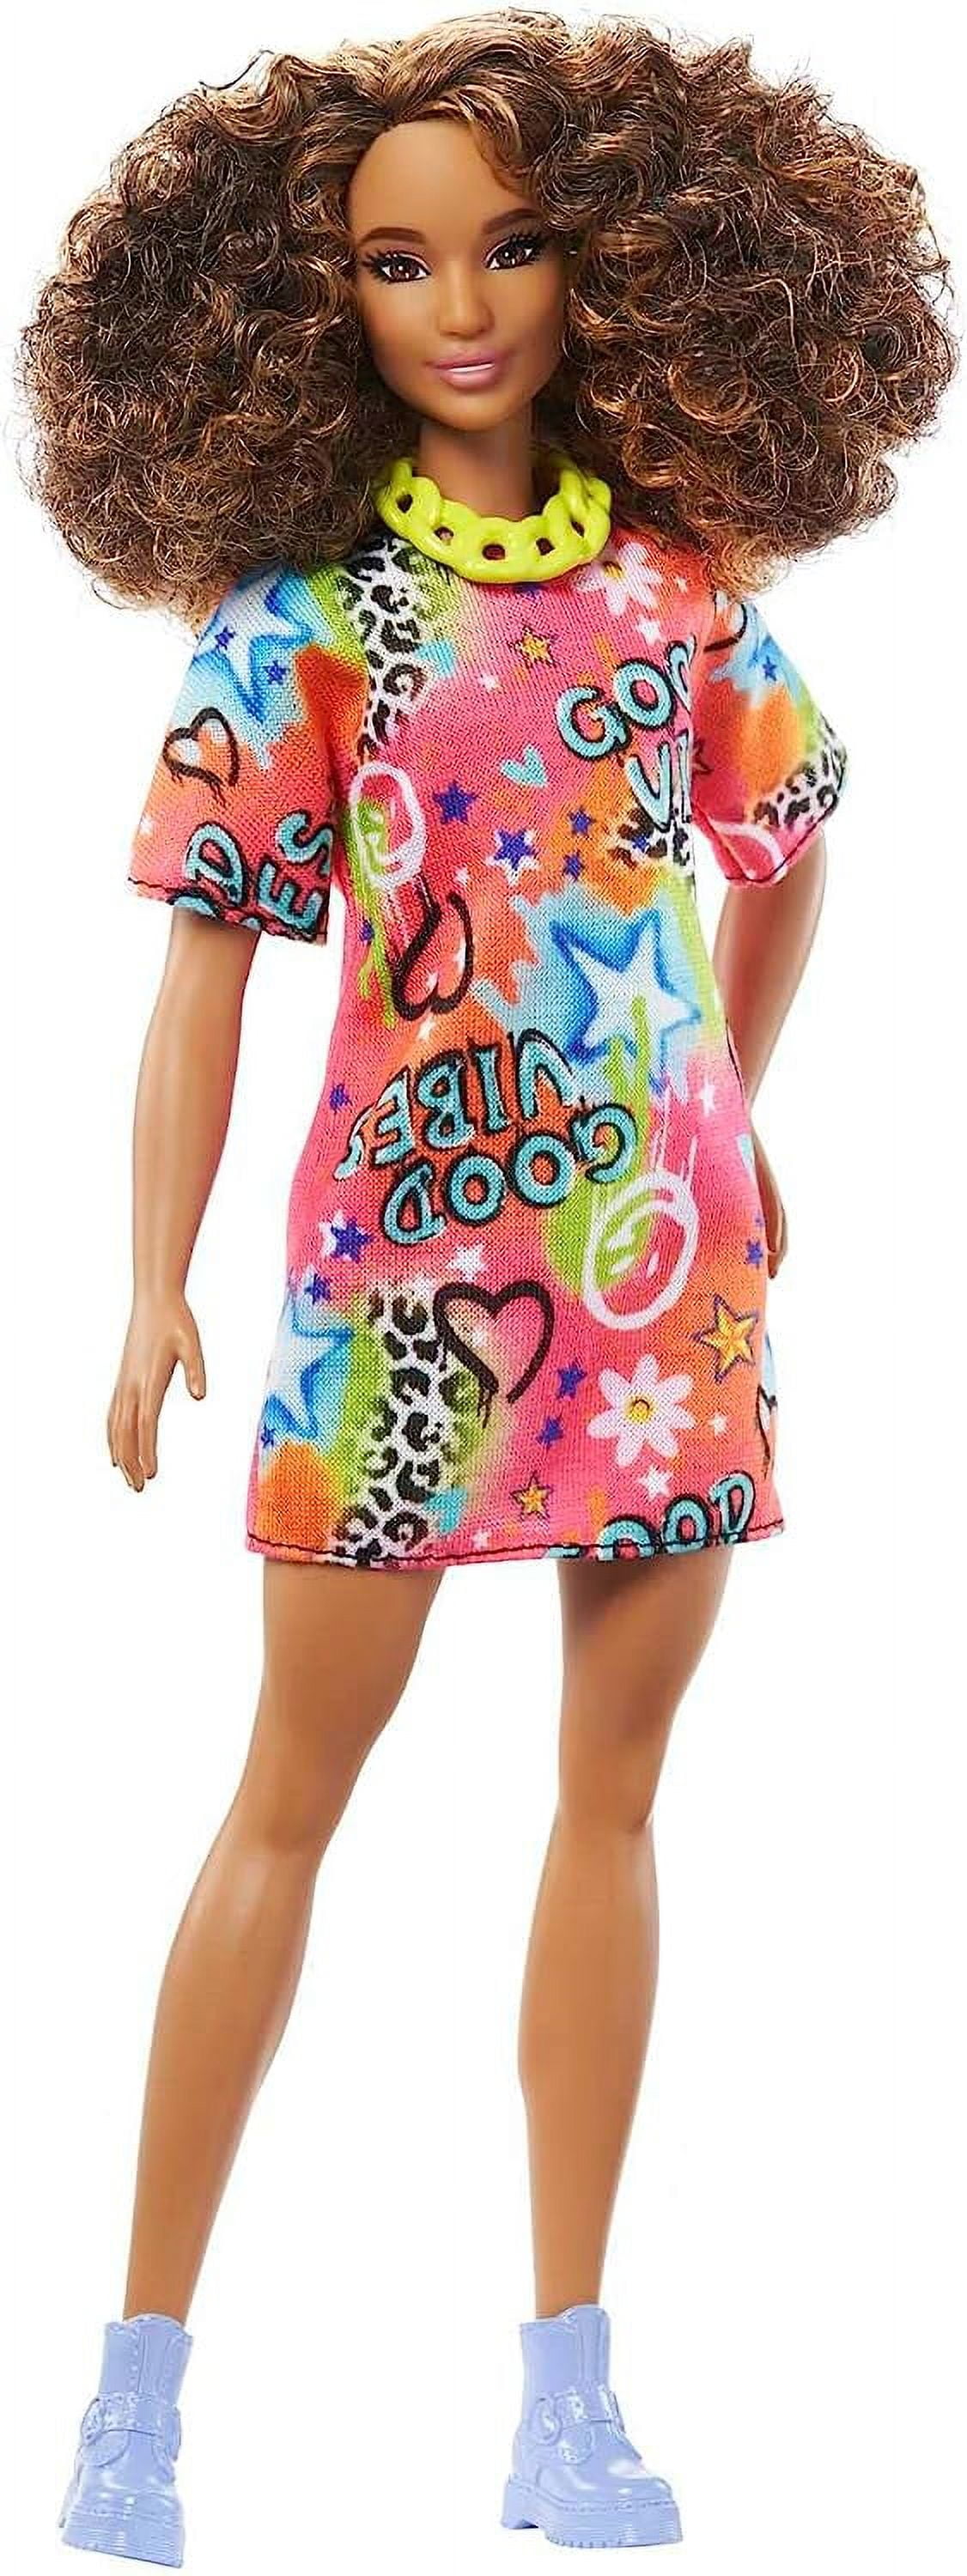 Barbie Doll, Kids Toys, Curly Brown Hair, Fashionistas, Athletic Body ...